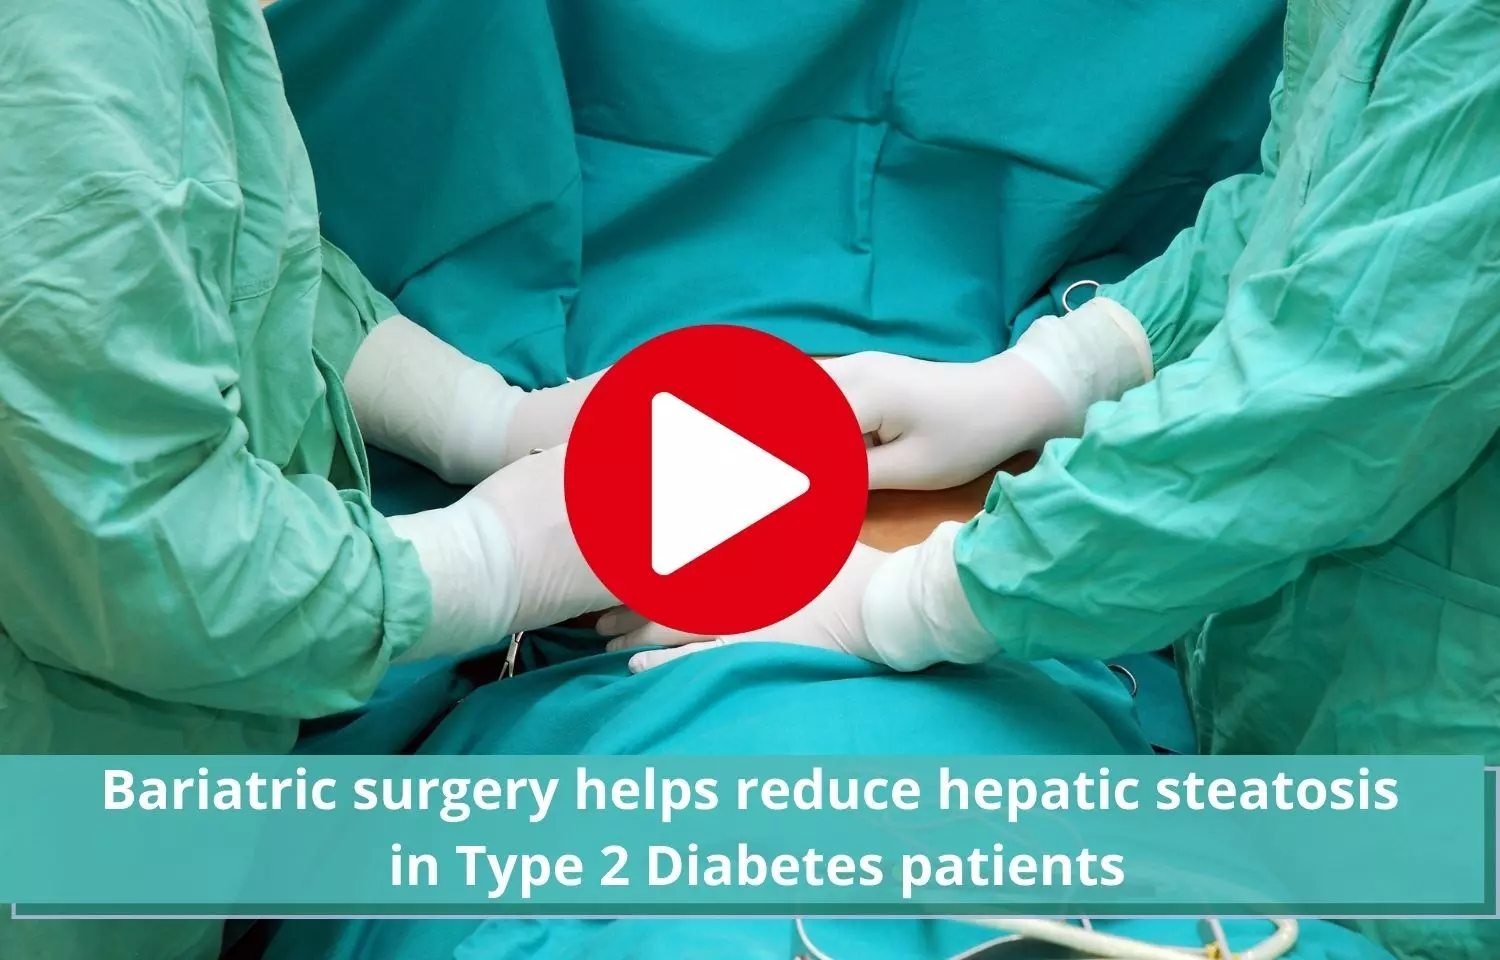 Bariatric surgery helps T2DM patients by reducing  hepatic steatosis